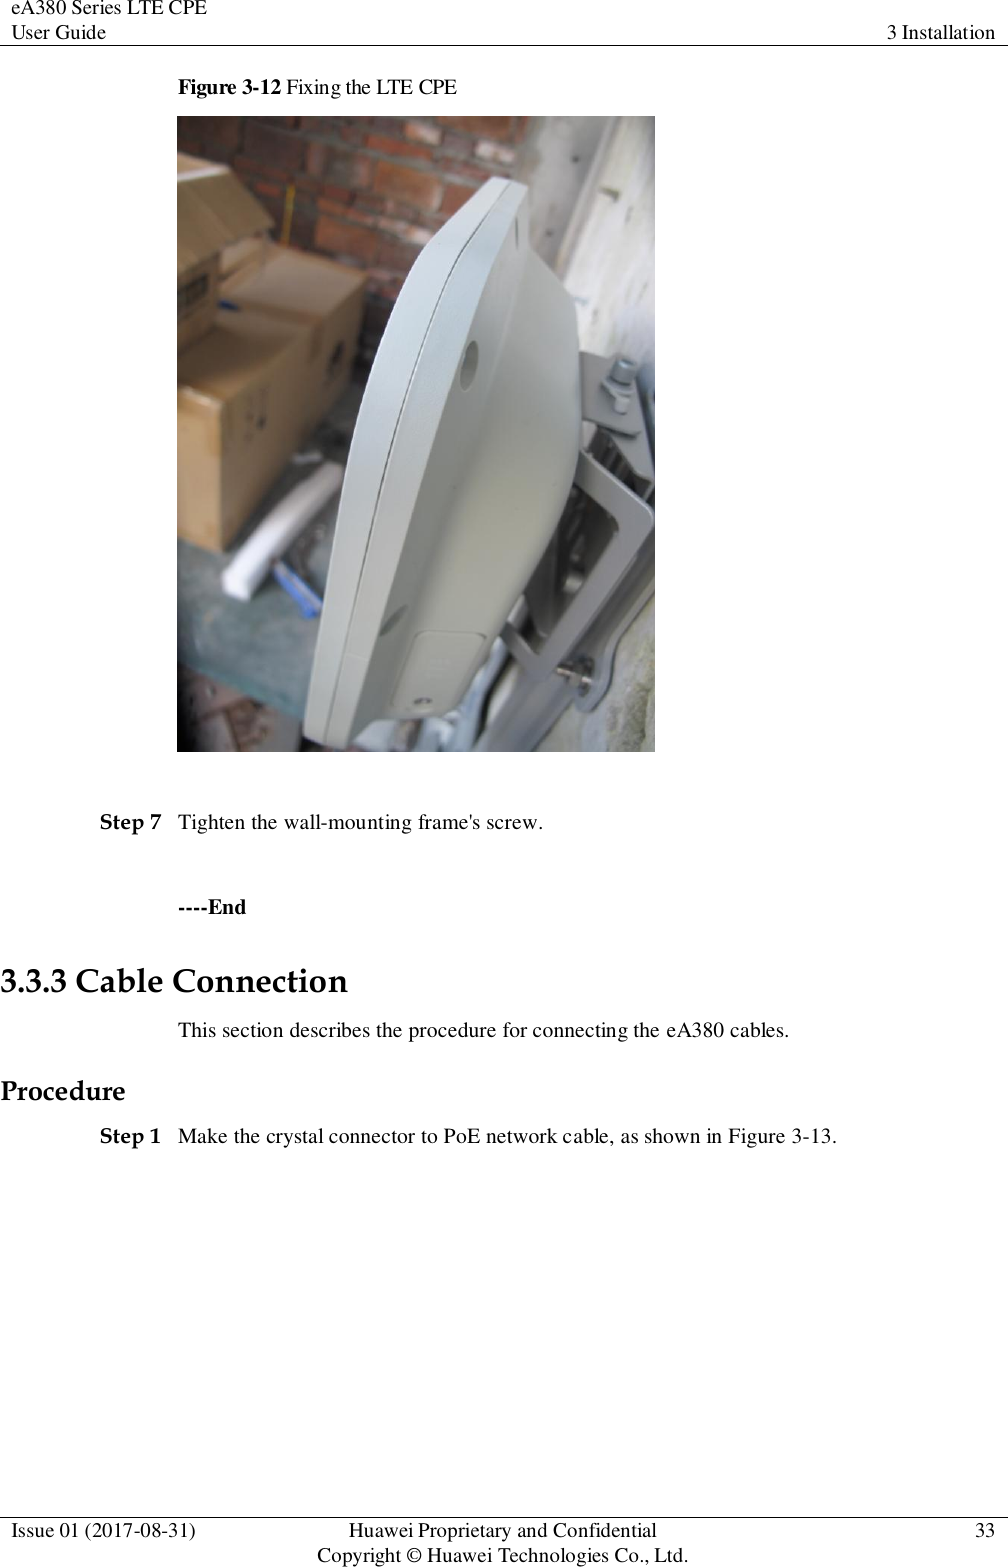 eA380 Series LTE CPE User Guide 3 Installation  Issue 01 (2017-08-31) Huawei Proprietary and Confidential                                     Copyright © Huawei Technologies Co., Ltd. 33  Figure 3-12 Fixing the LTE CPE   Step 7 Tighten the wall-mounting frame&apos;s screw.    ----End 3.3.3 Cable Connection This section describes the procedure for connecting the eA380 cables.   Procedure Step 1 Make the crystal connector to PoE network cable, as shown in Figure 3-13. 